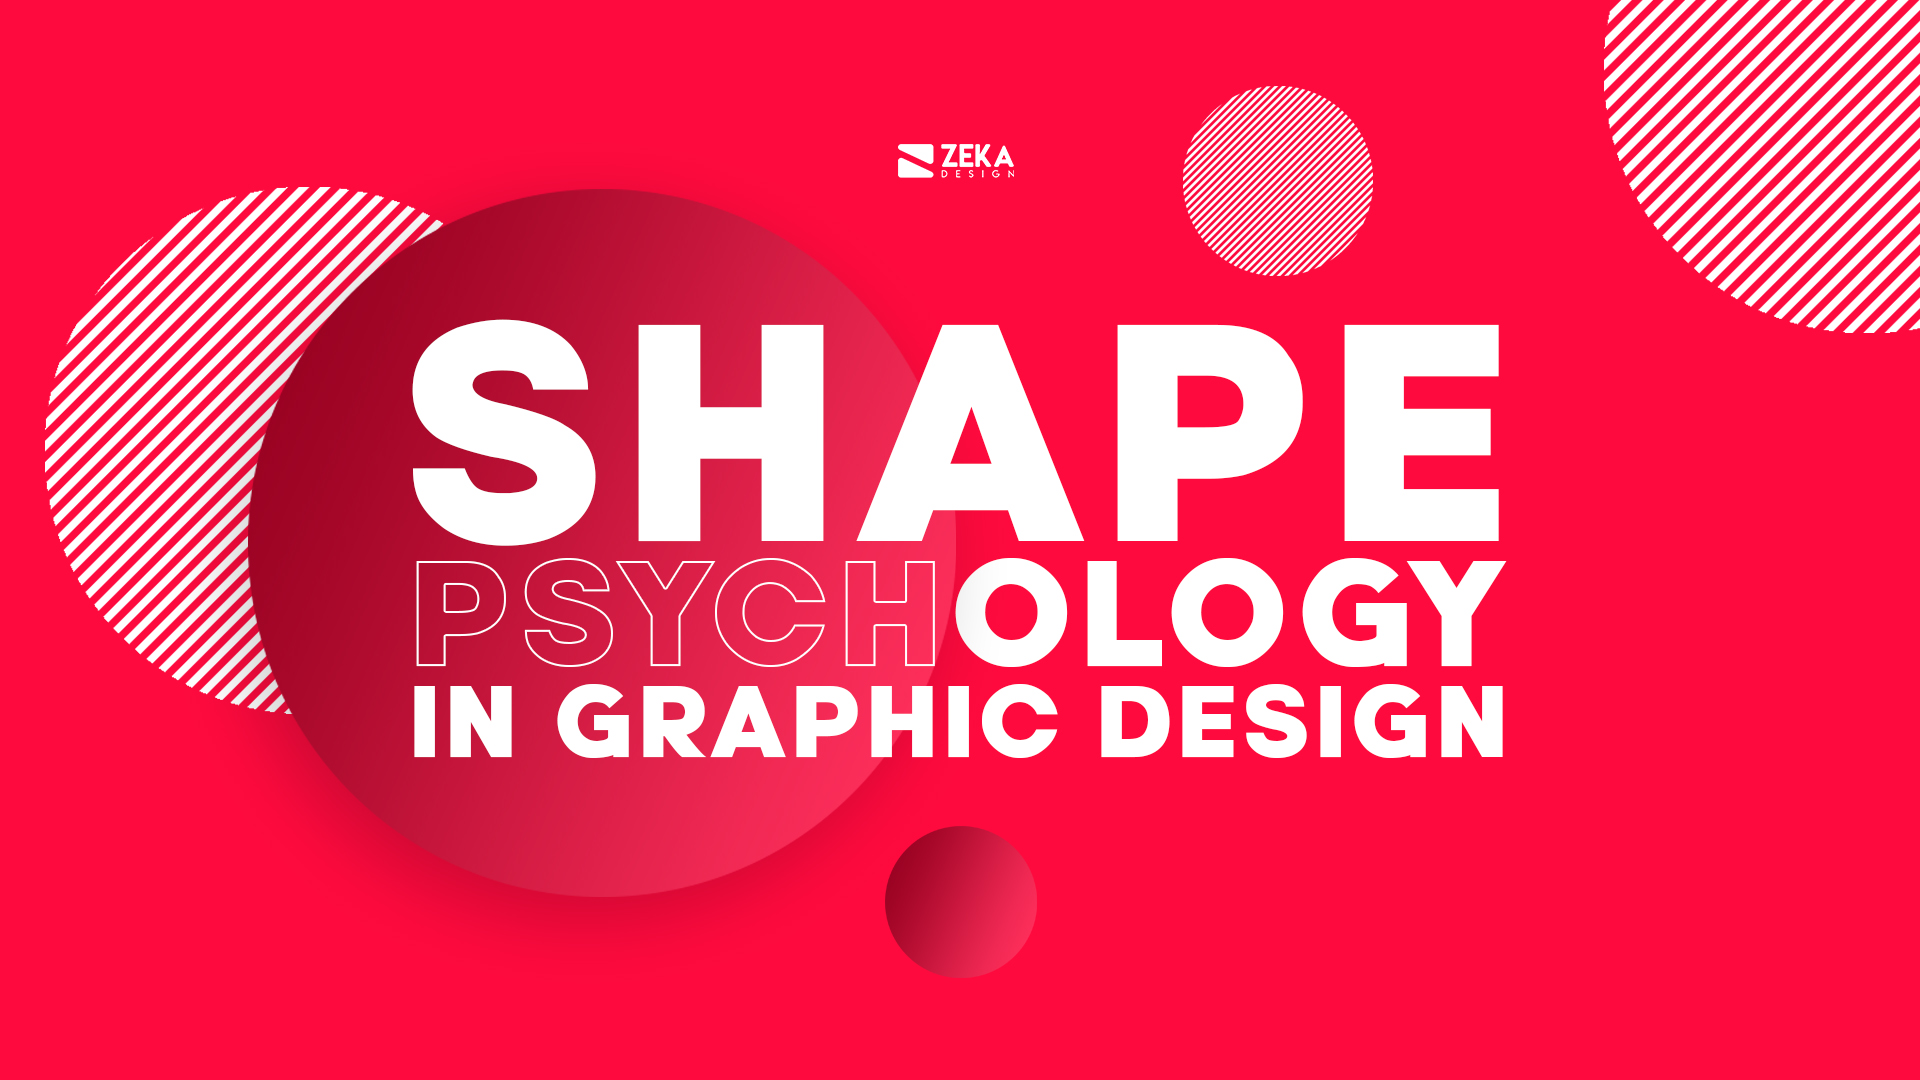 Psychology of shapes in Design: how different shapes can affect